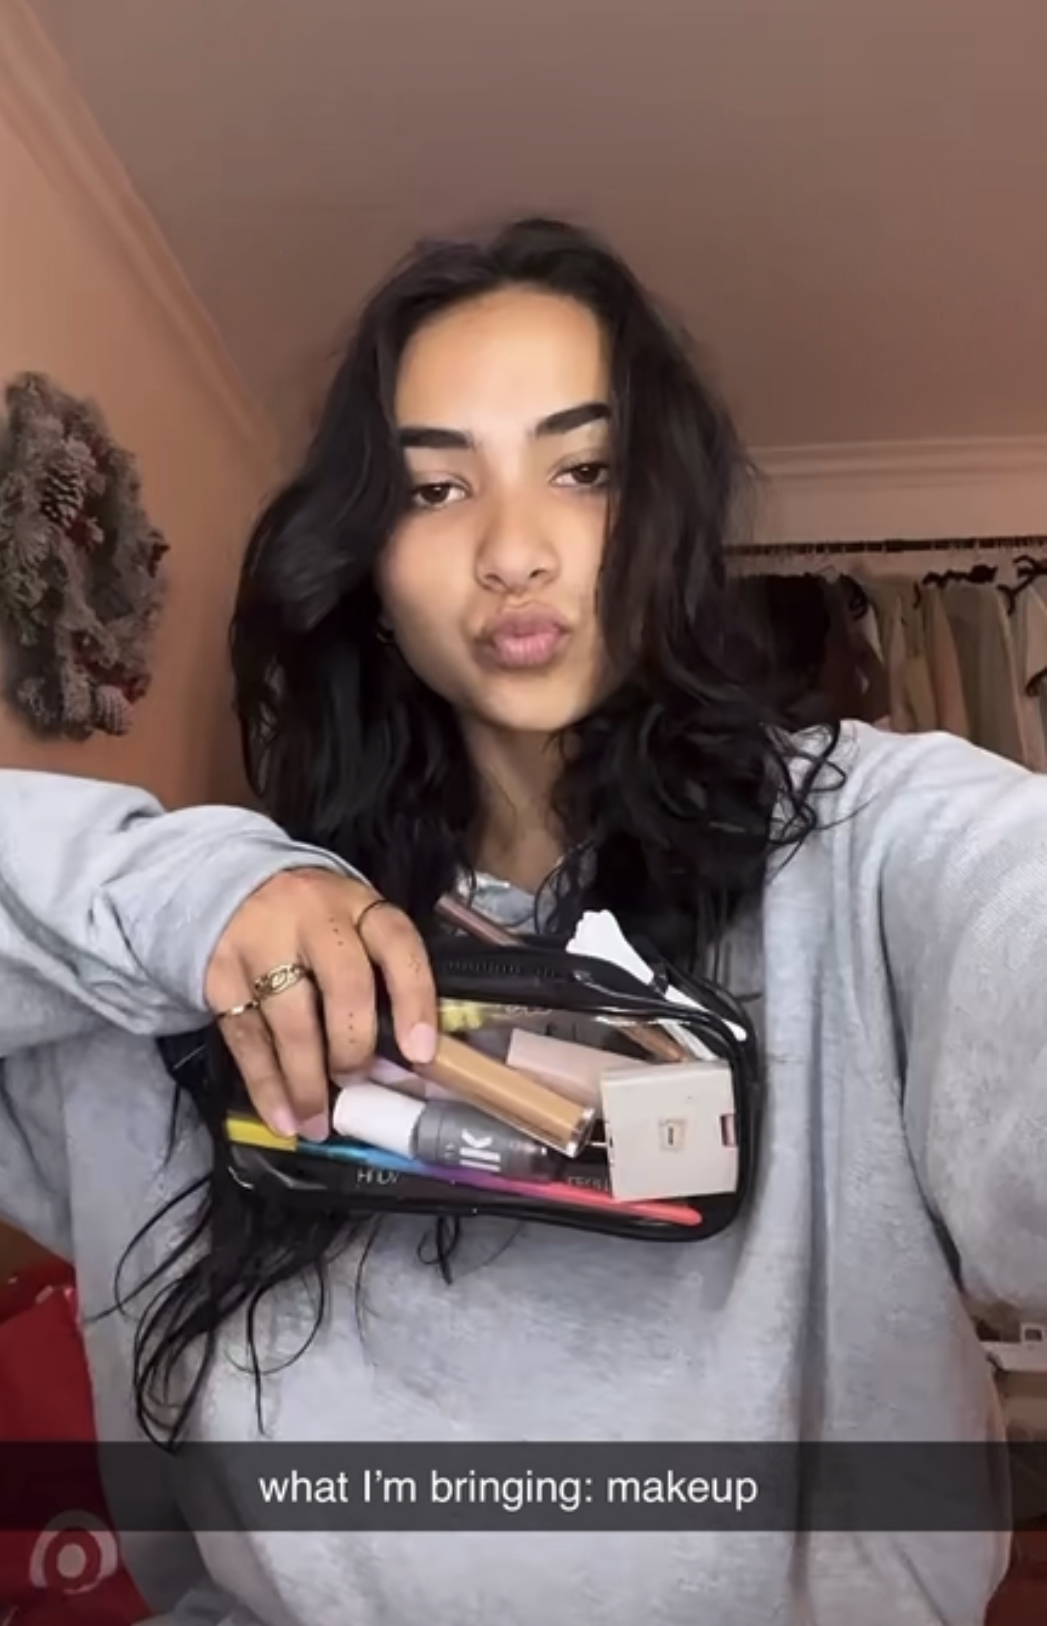 Sienna Mae Gomez poses with clear makeup travel bag on Snapchat